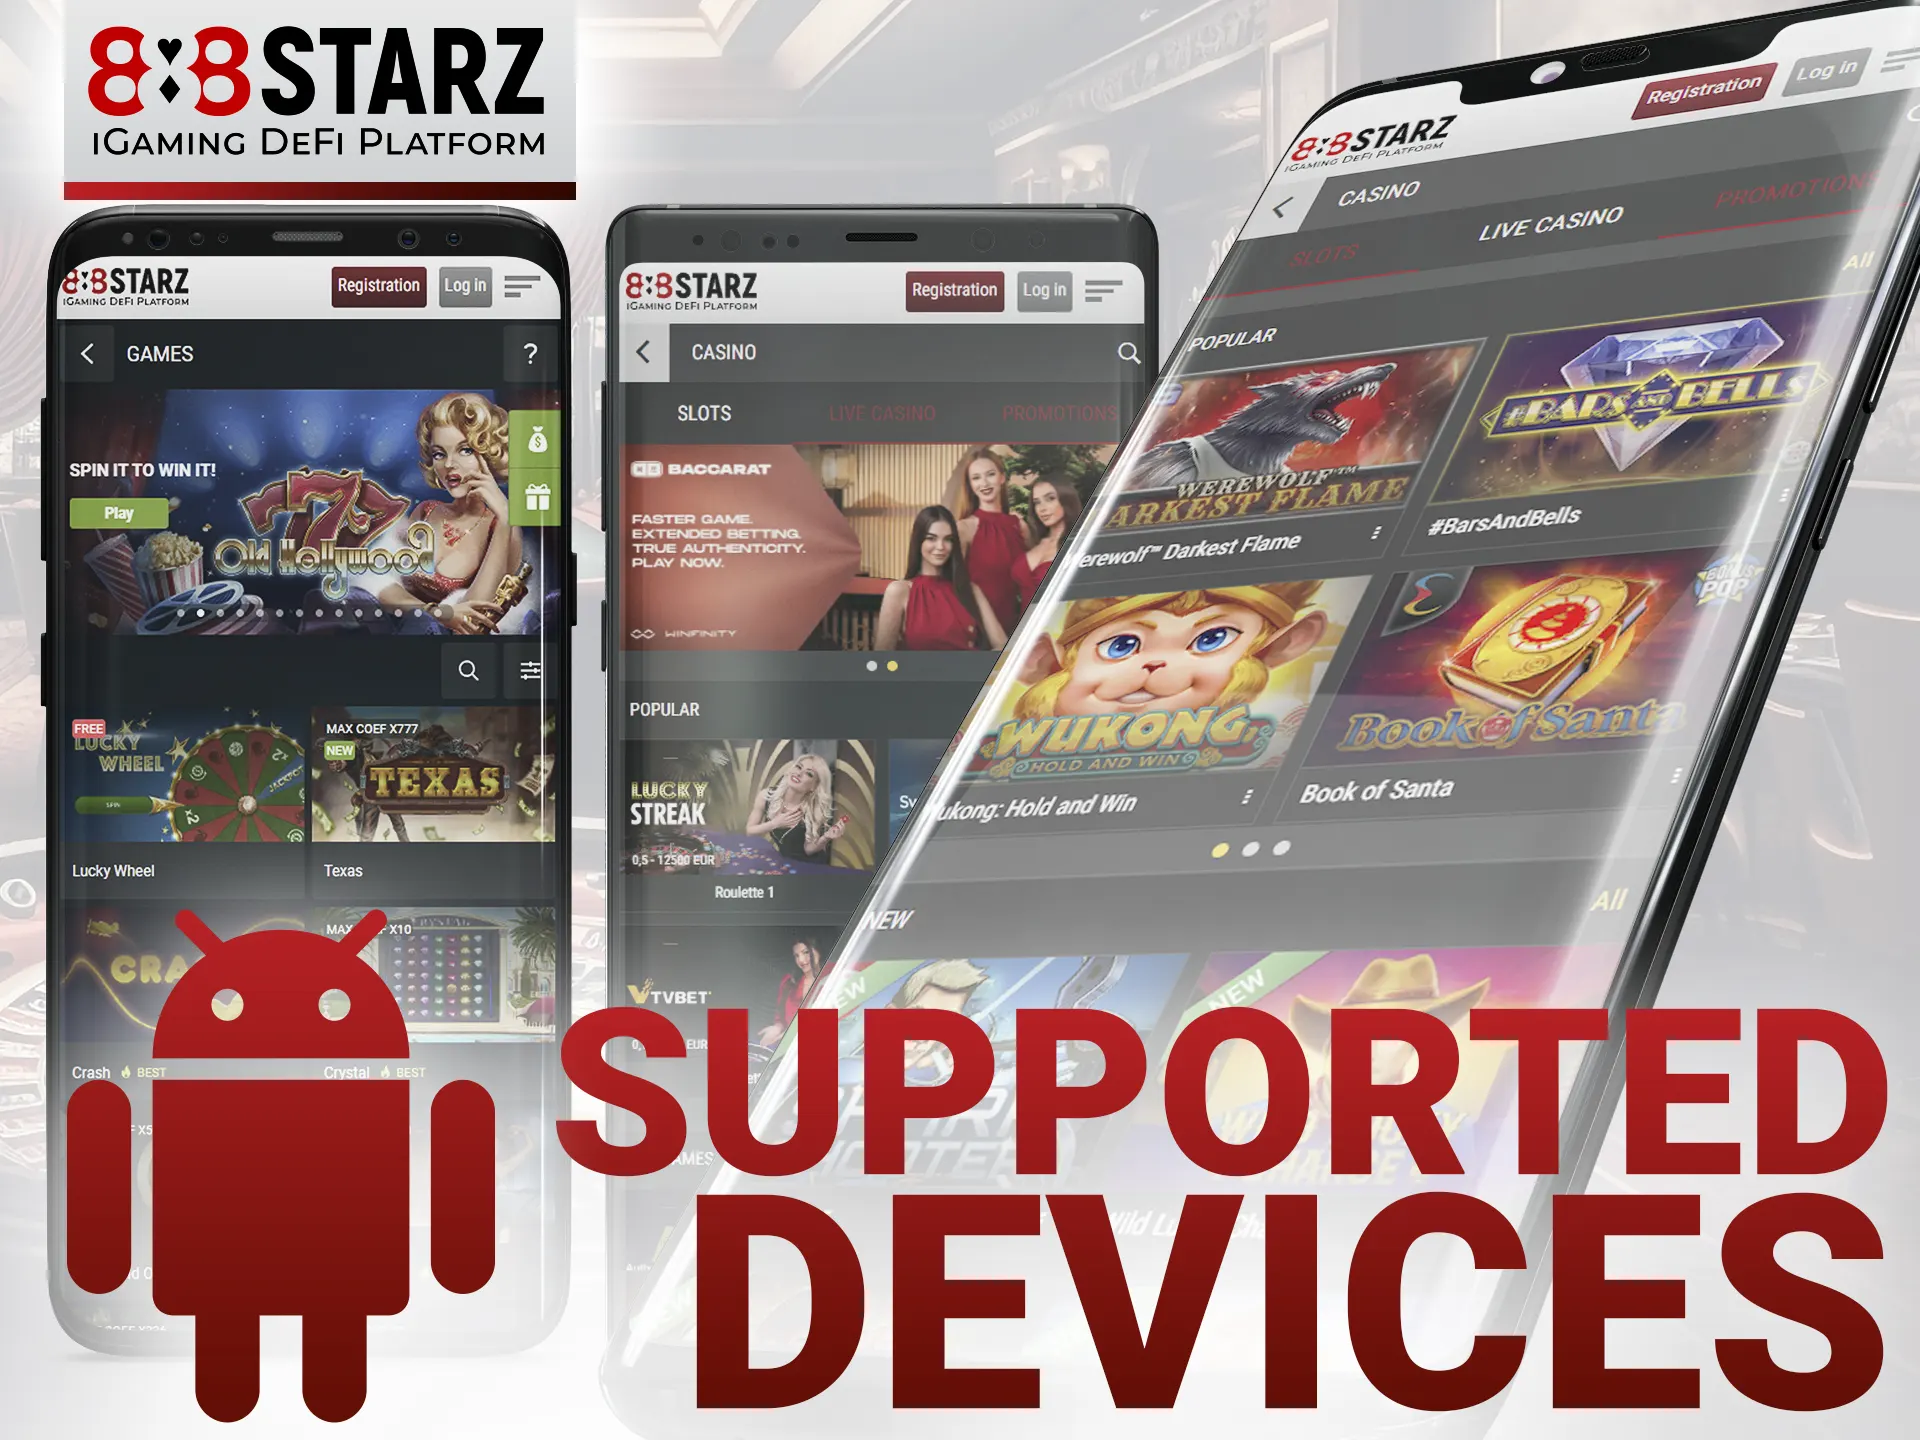 Install 888Starz app on your Android device.